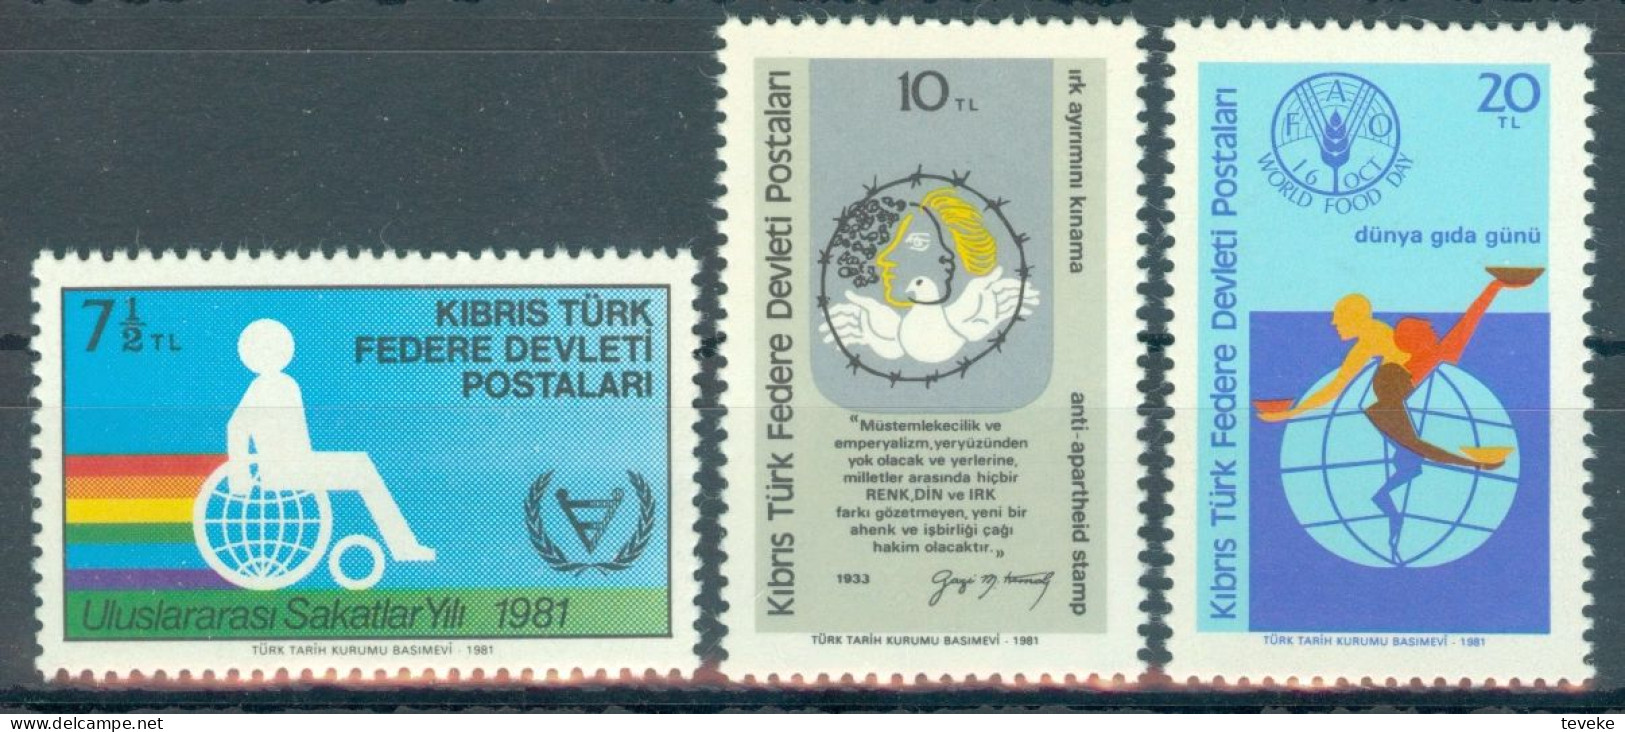 TURKISH CYPRUS 1981 - Michel Nr. 105/107 - MNH ** - Year Of The Disabled / Anti-Rasism / FAO - Unused Stamps